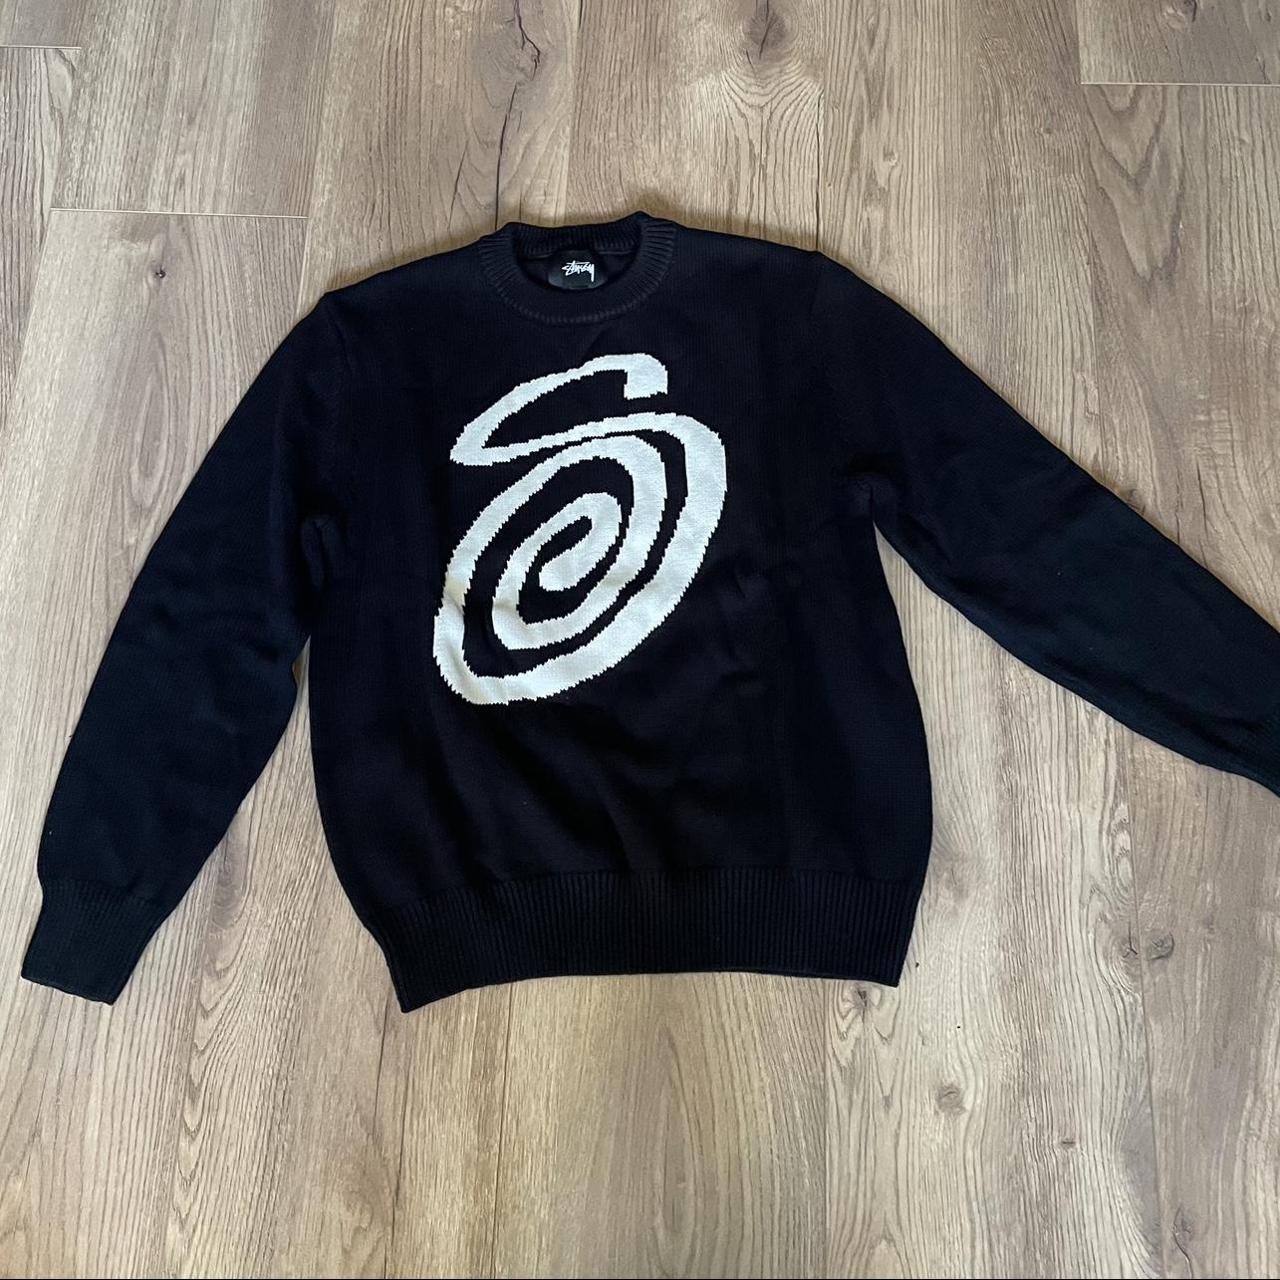 Stussy Peter Tosh knit sweater Brand new with... - Depop